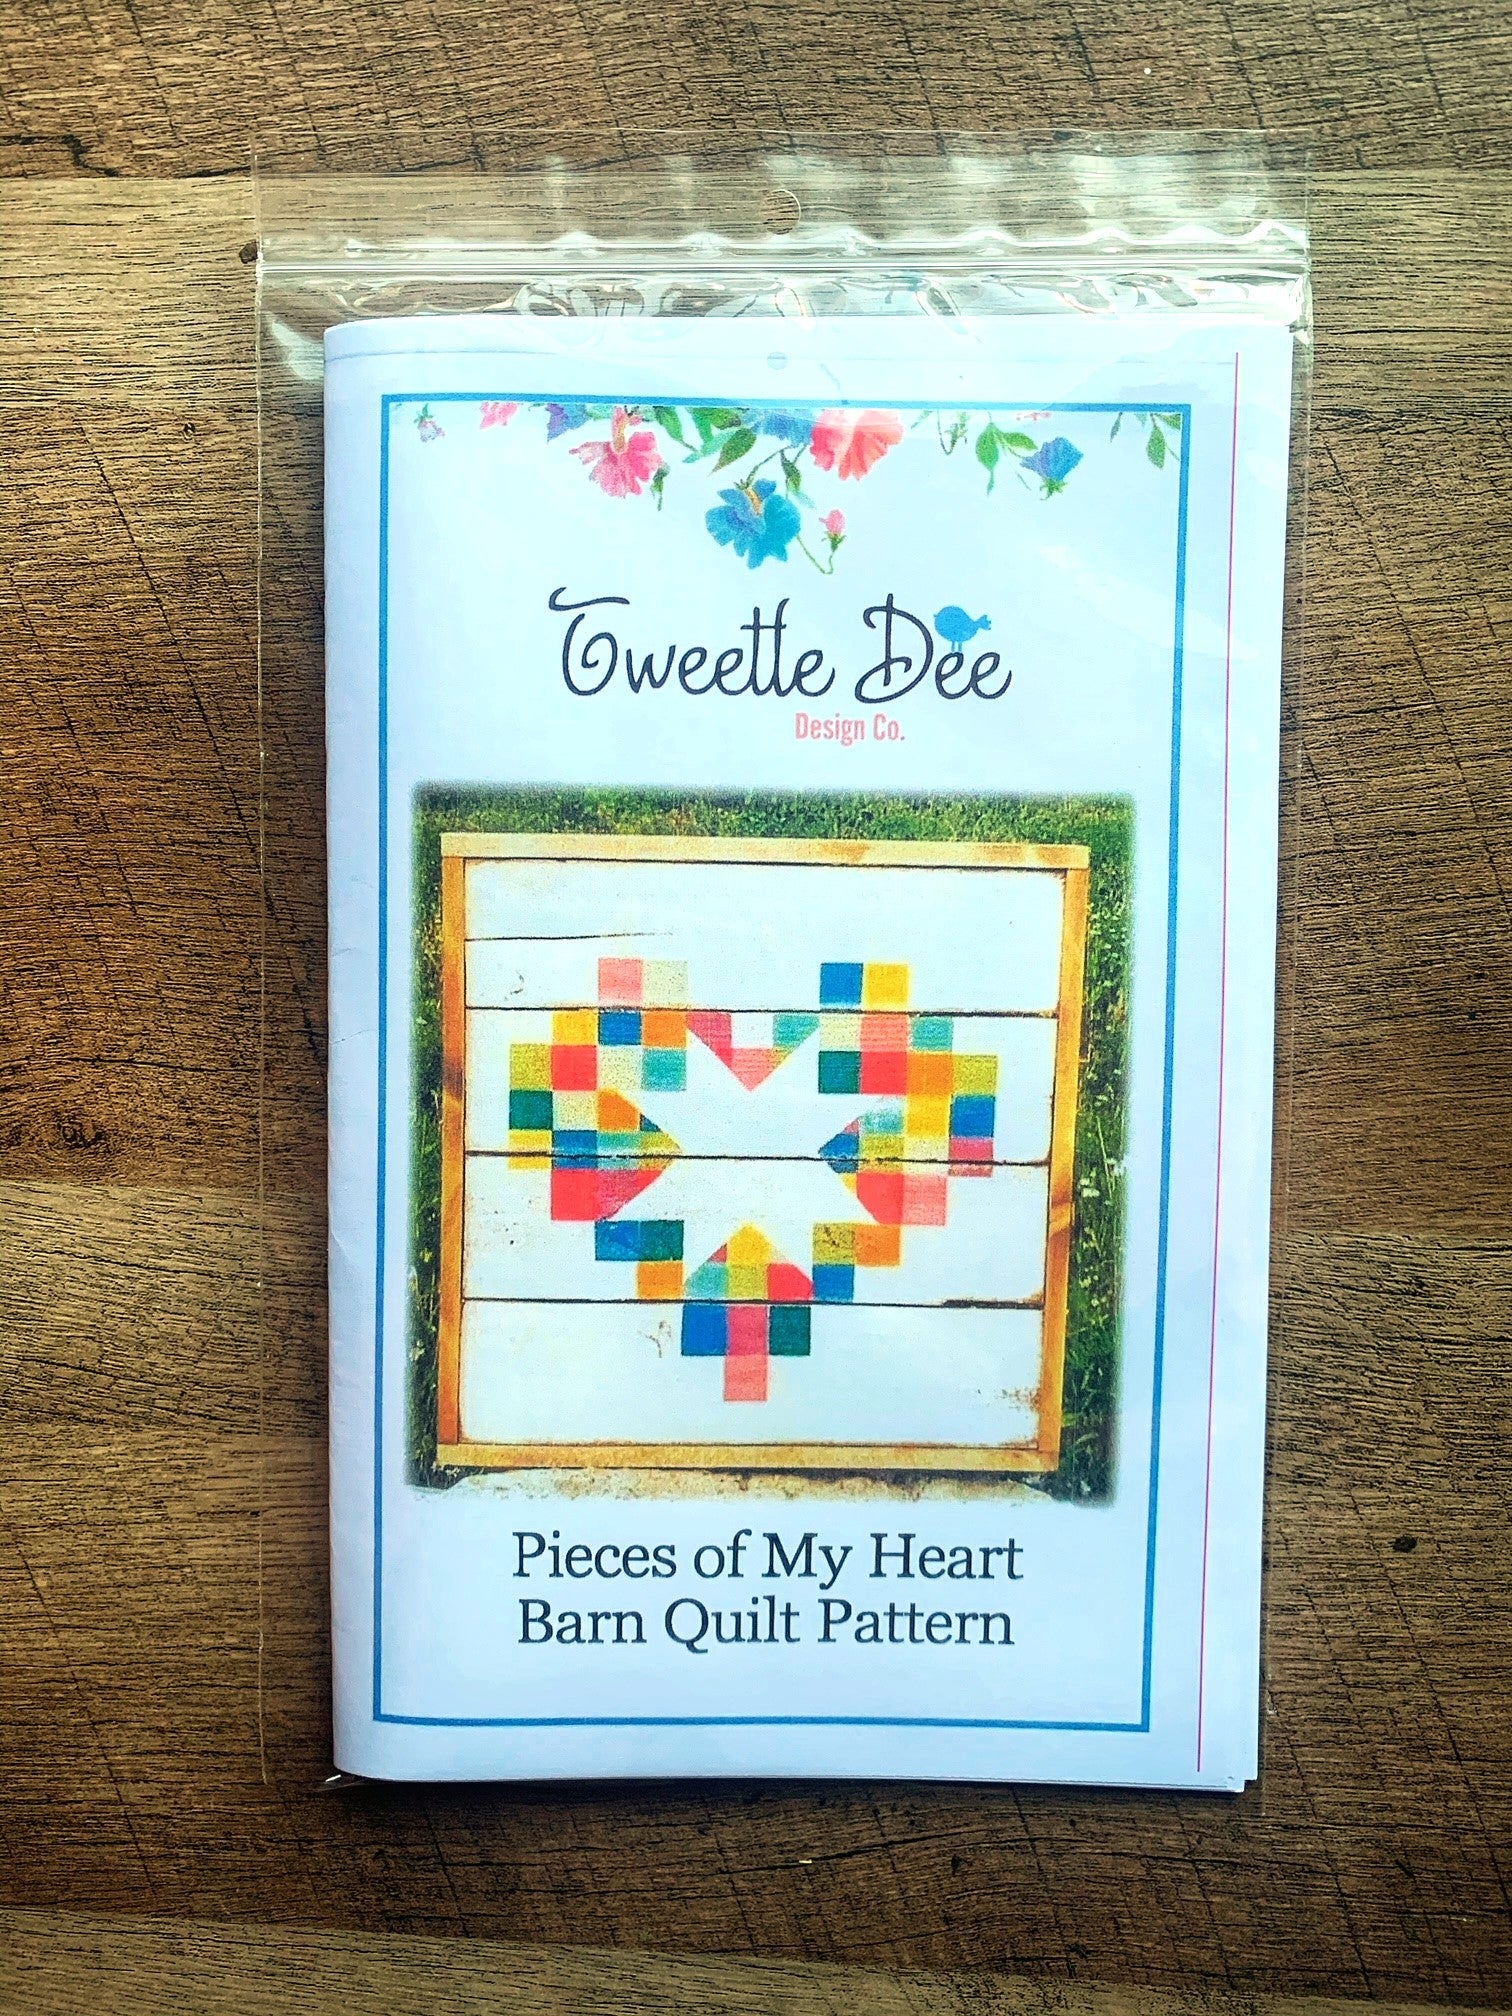 Pieces of My Heart Barn Quilt Pattern